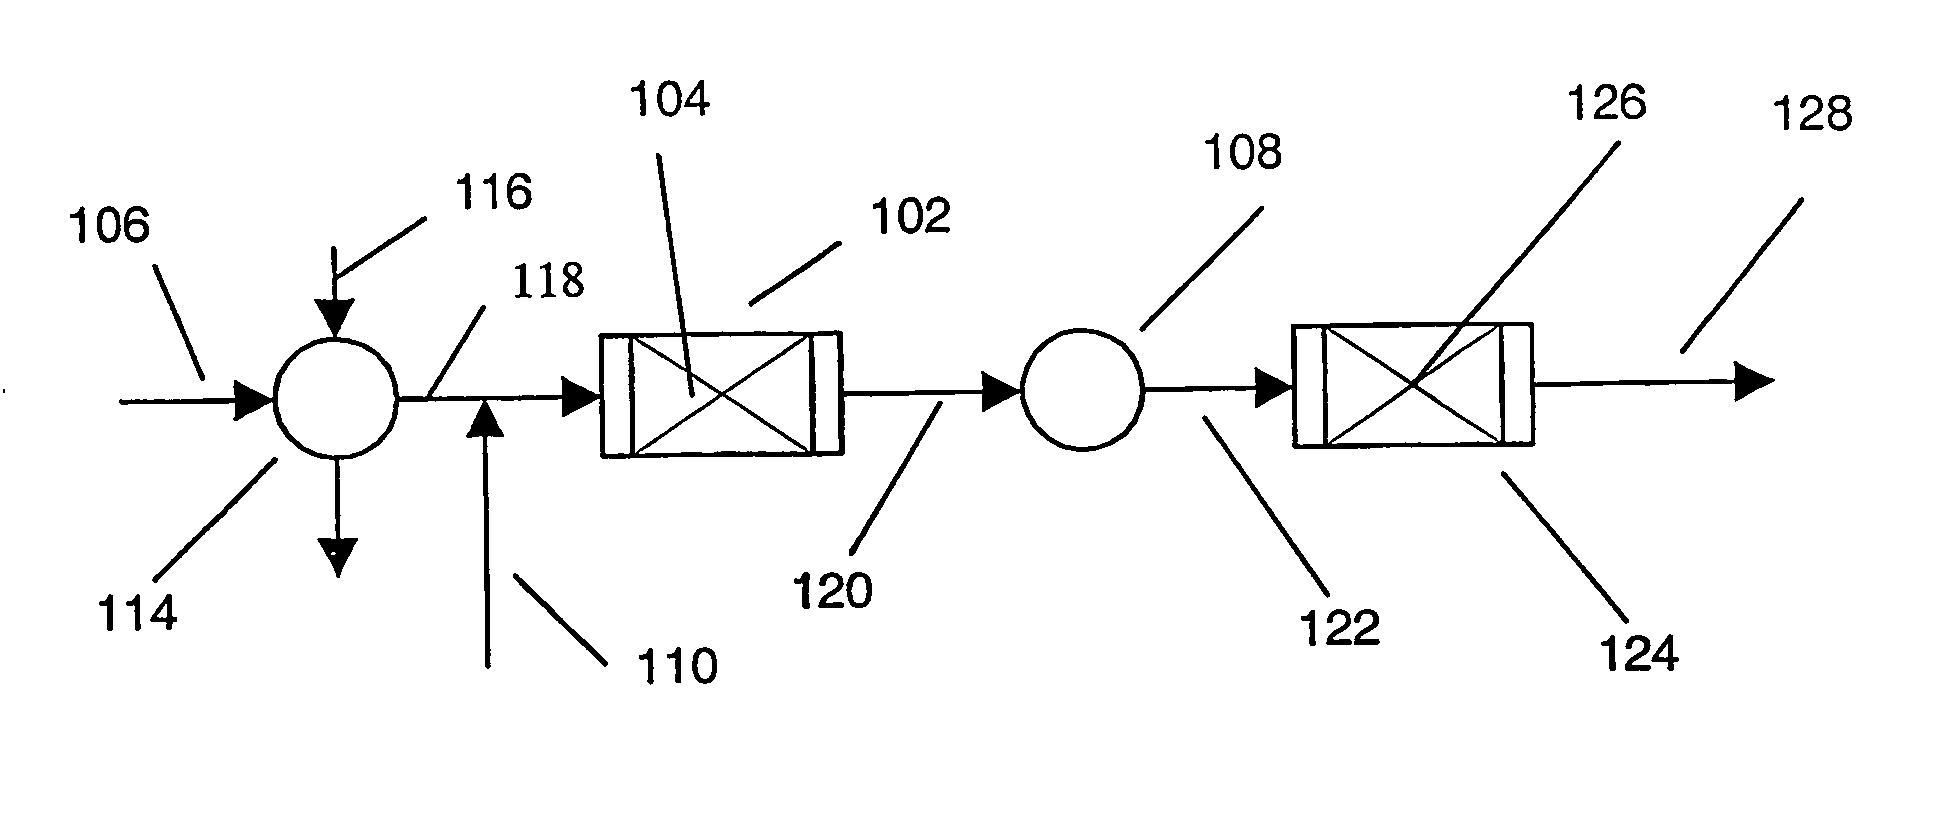 Hydrogen generator having sulfur compound removal and processes for the same